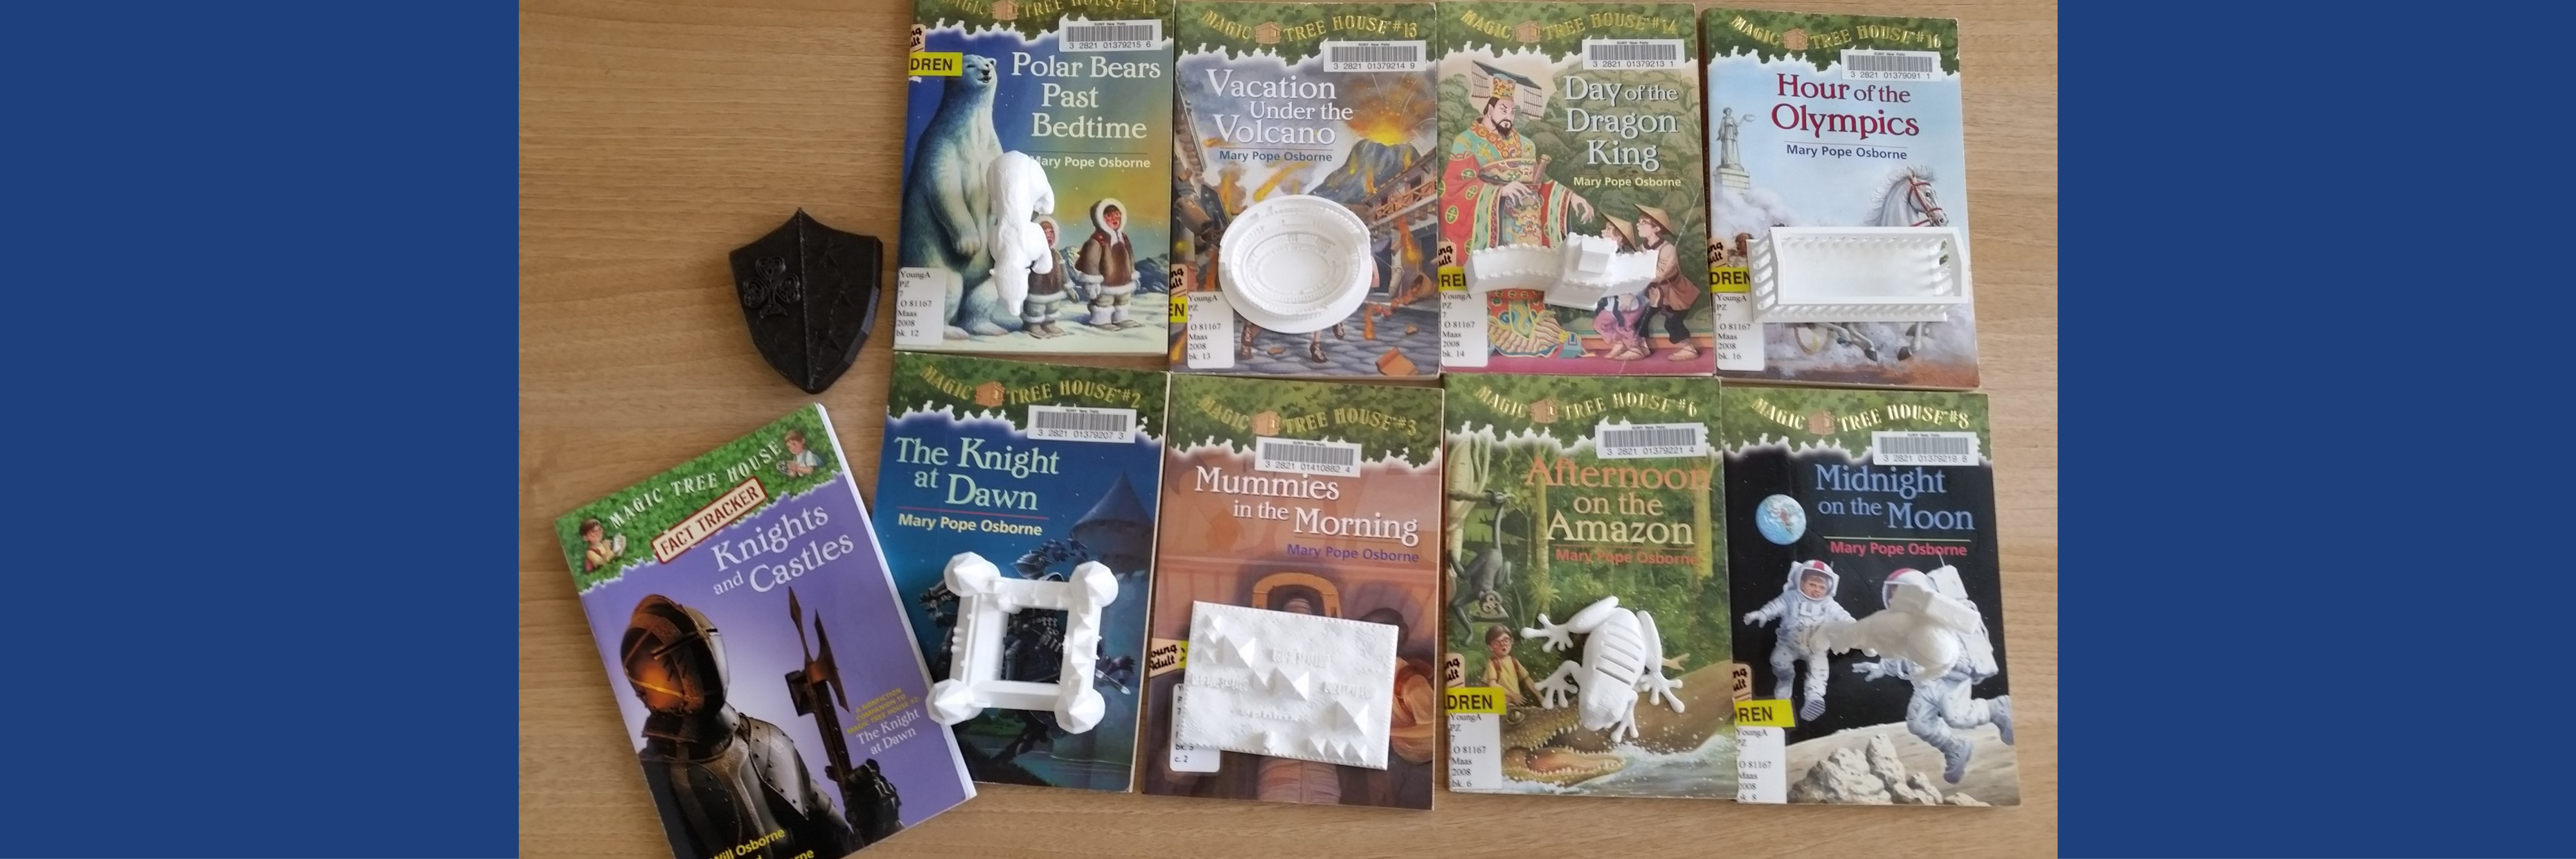 Magic Tree House books with 3D printed models of an object in the book 